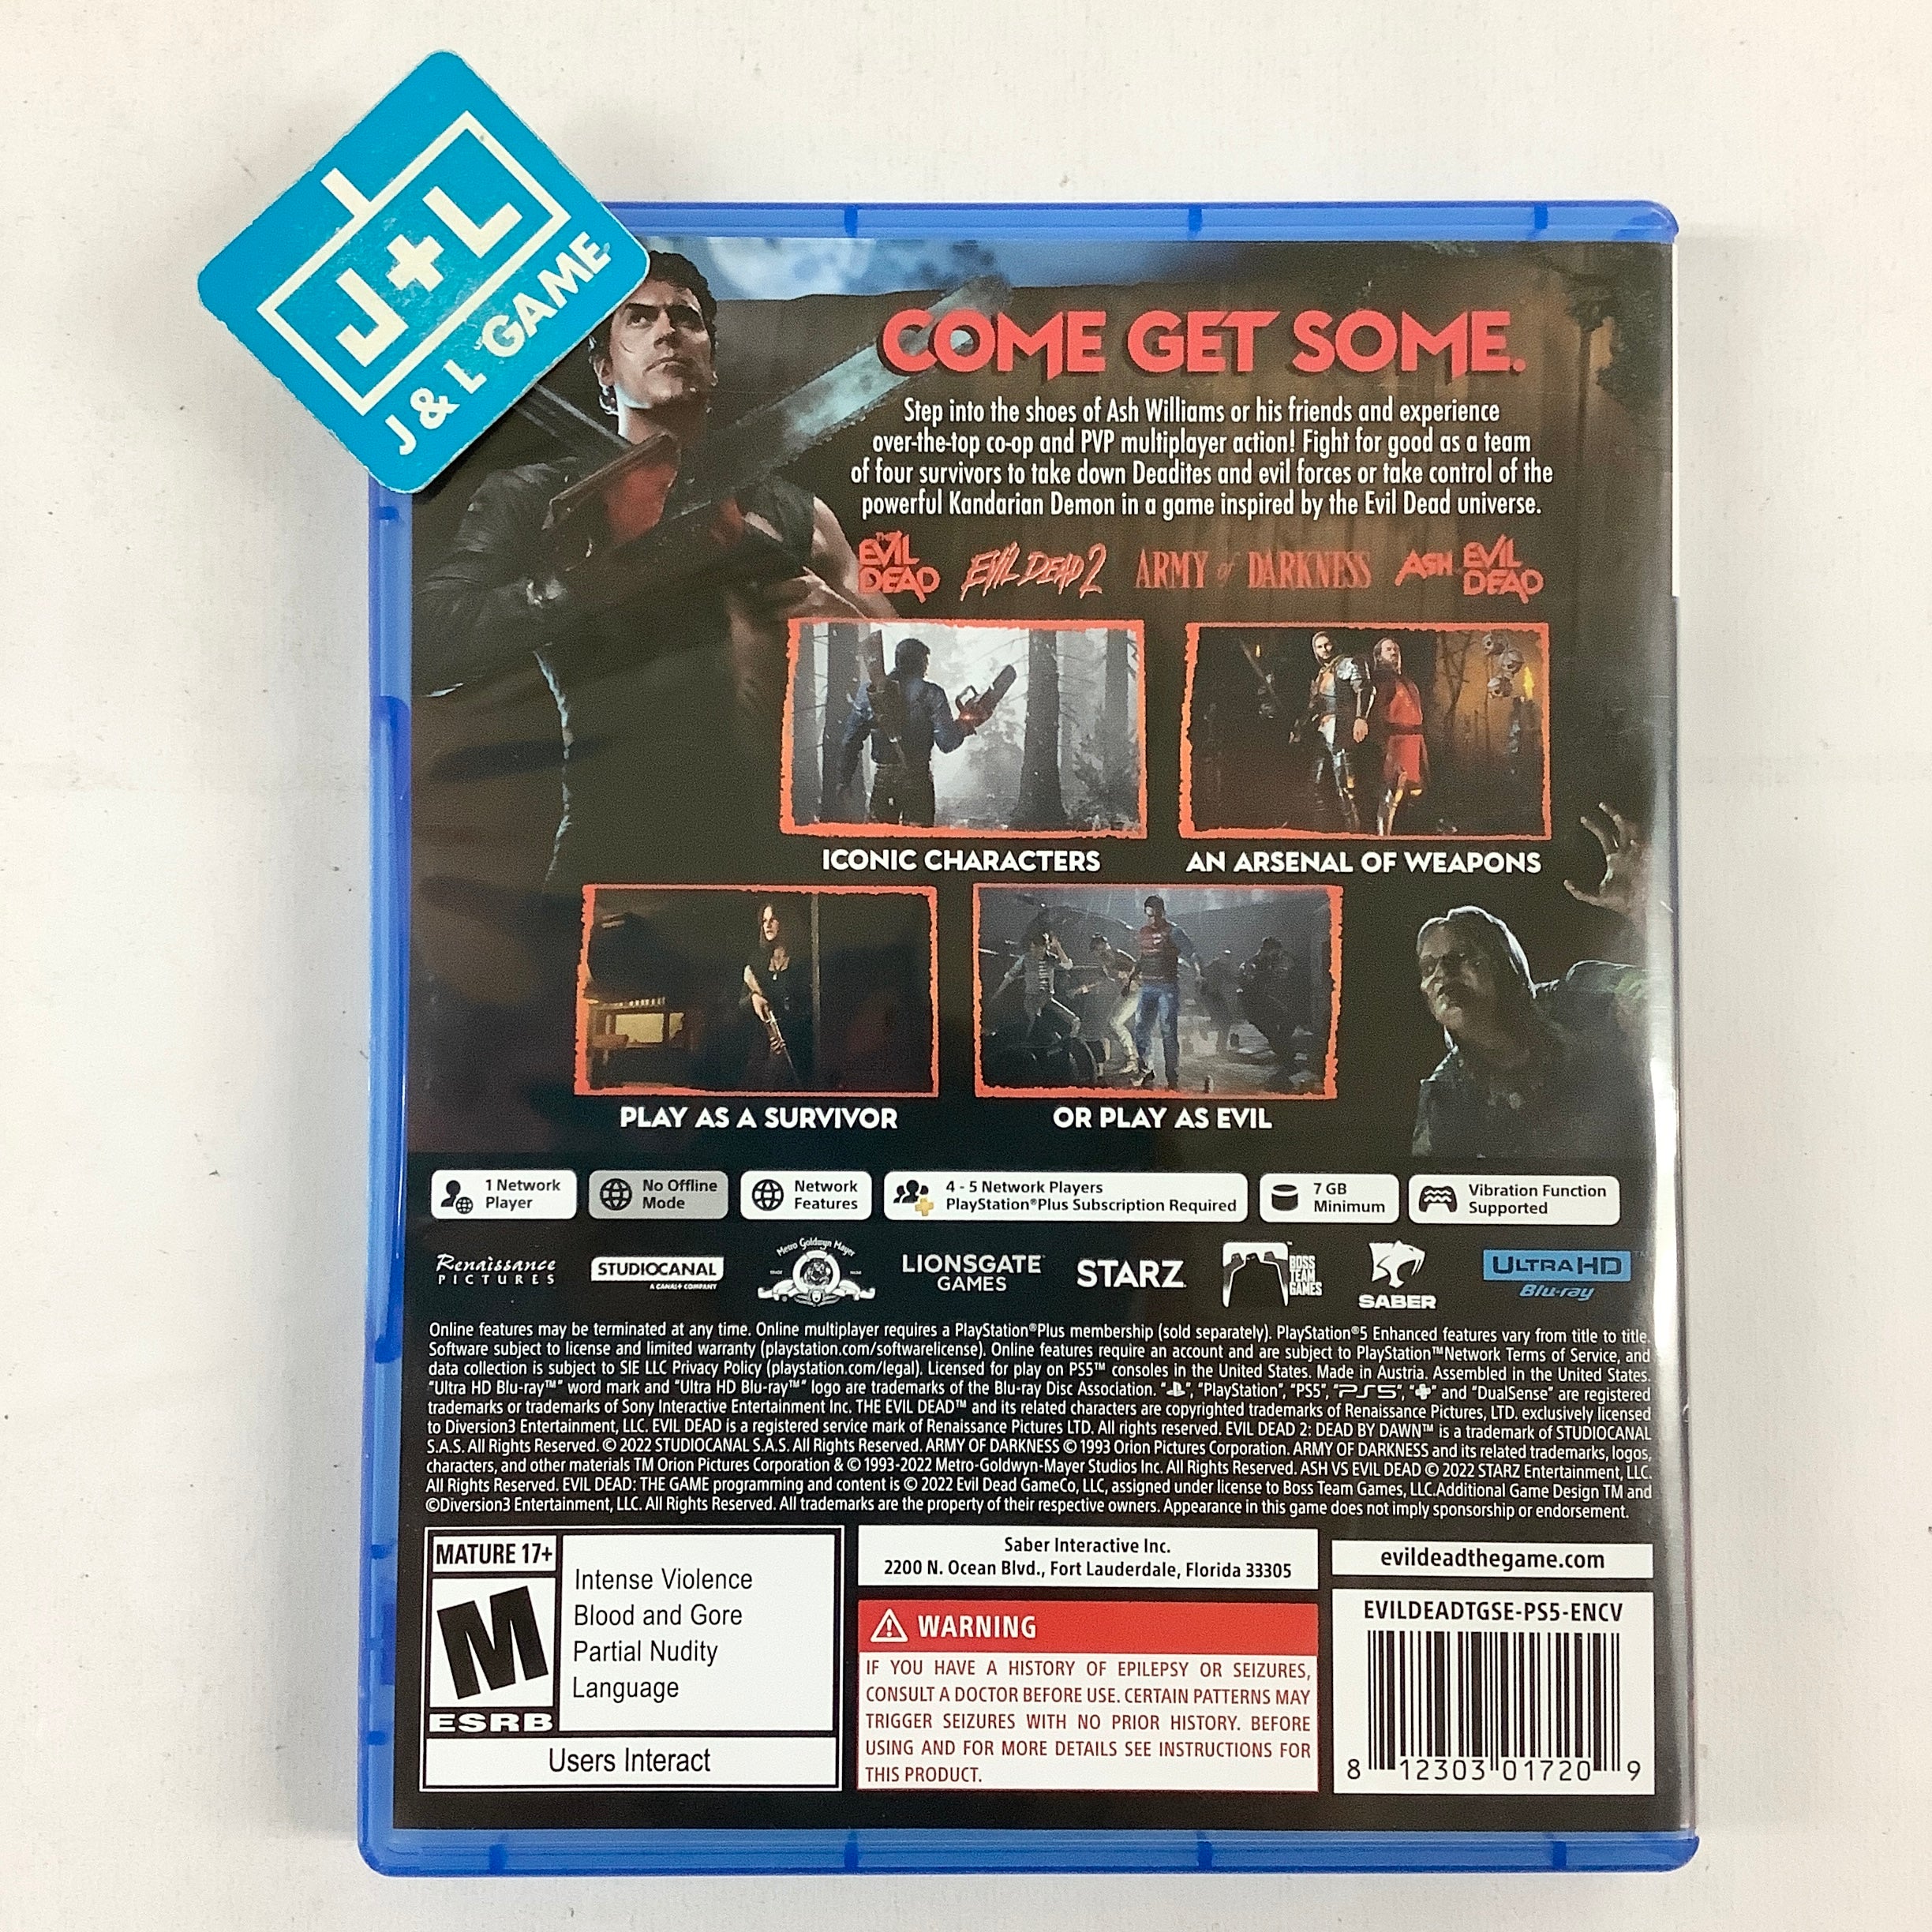 Evil Dead: The Game - (PS5) PlayStation 5 [Pre-Owned] Video Games Nighthawk   